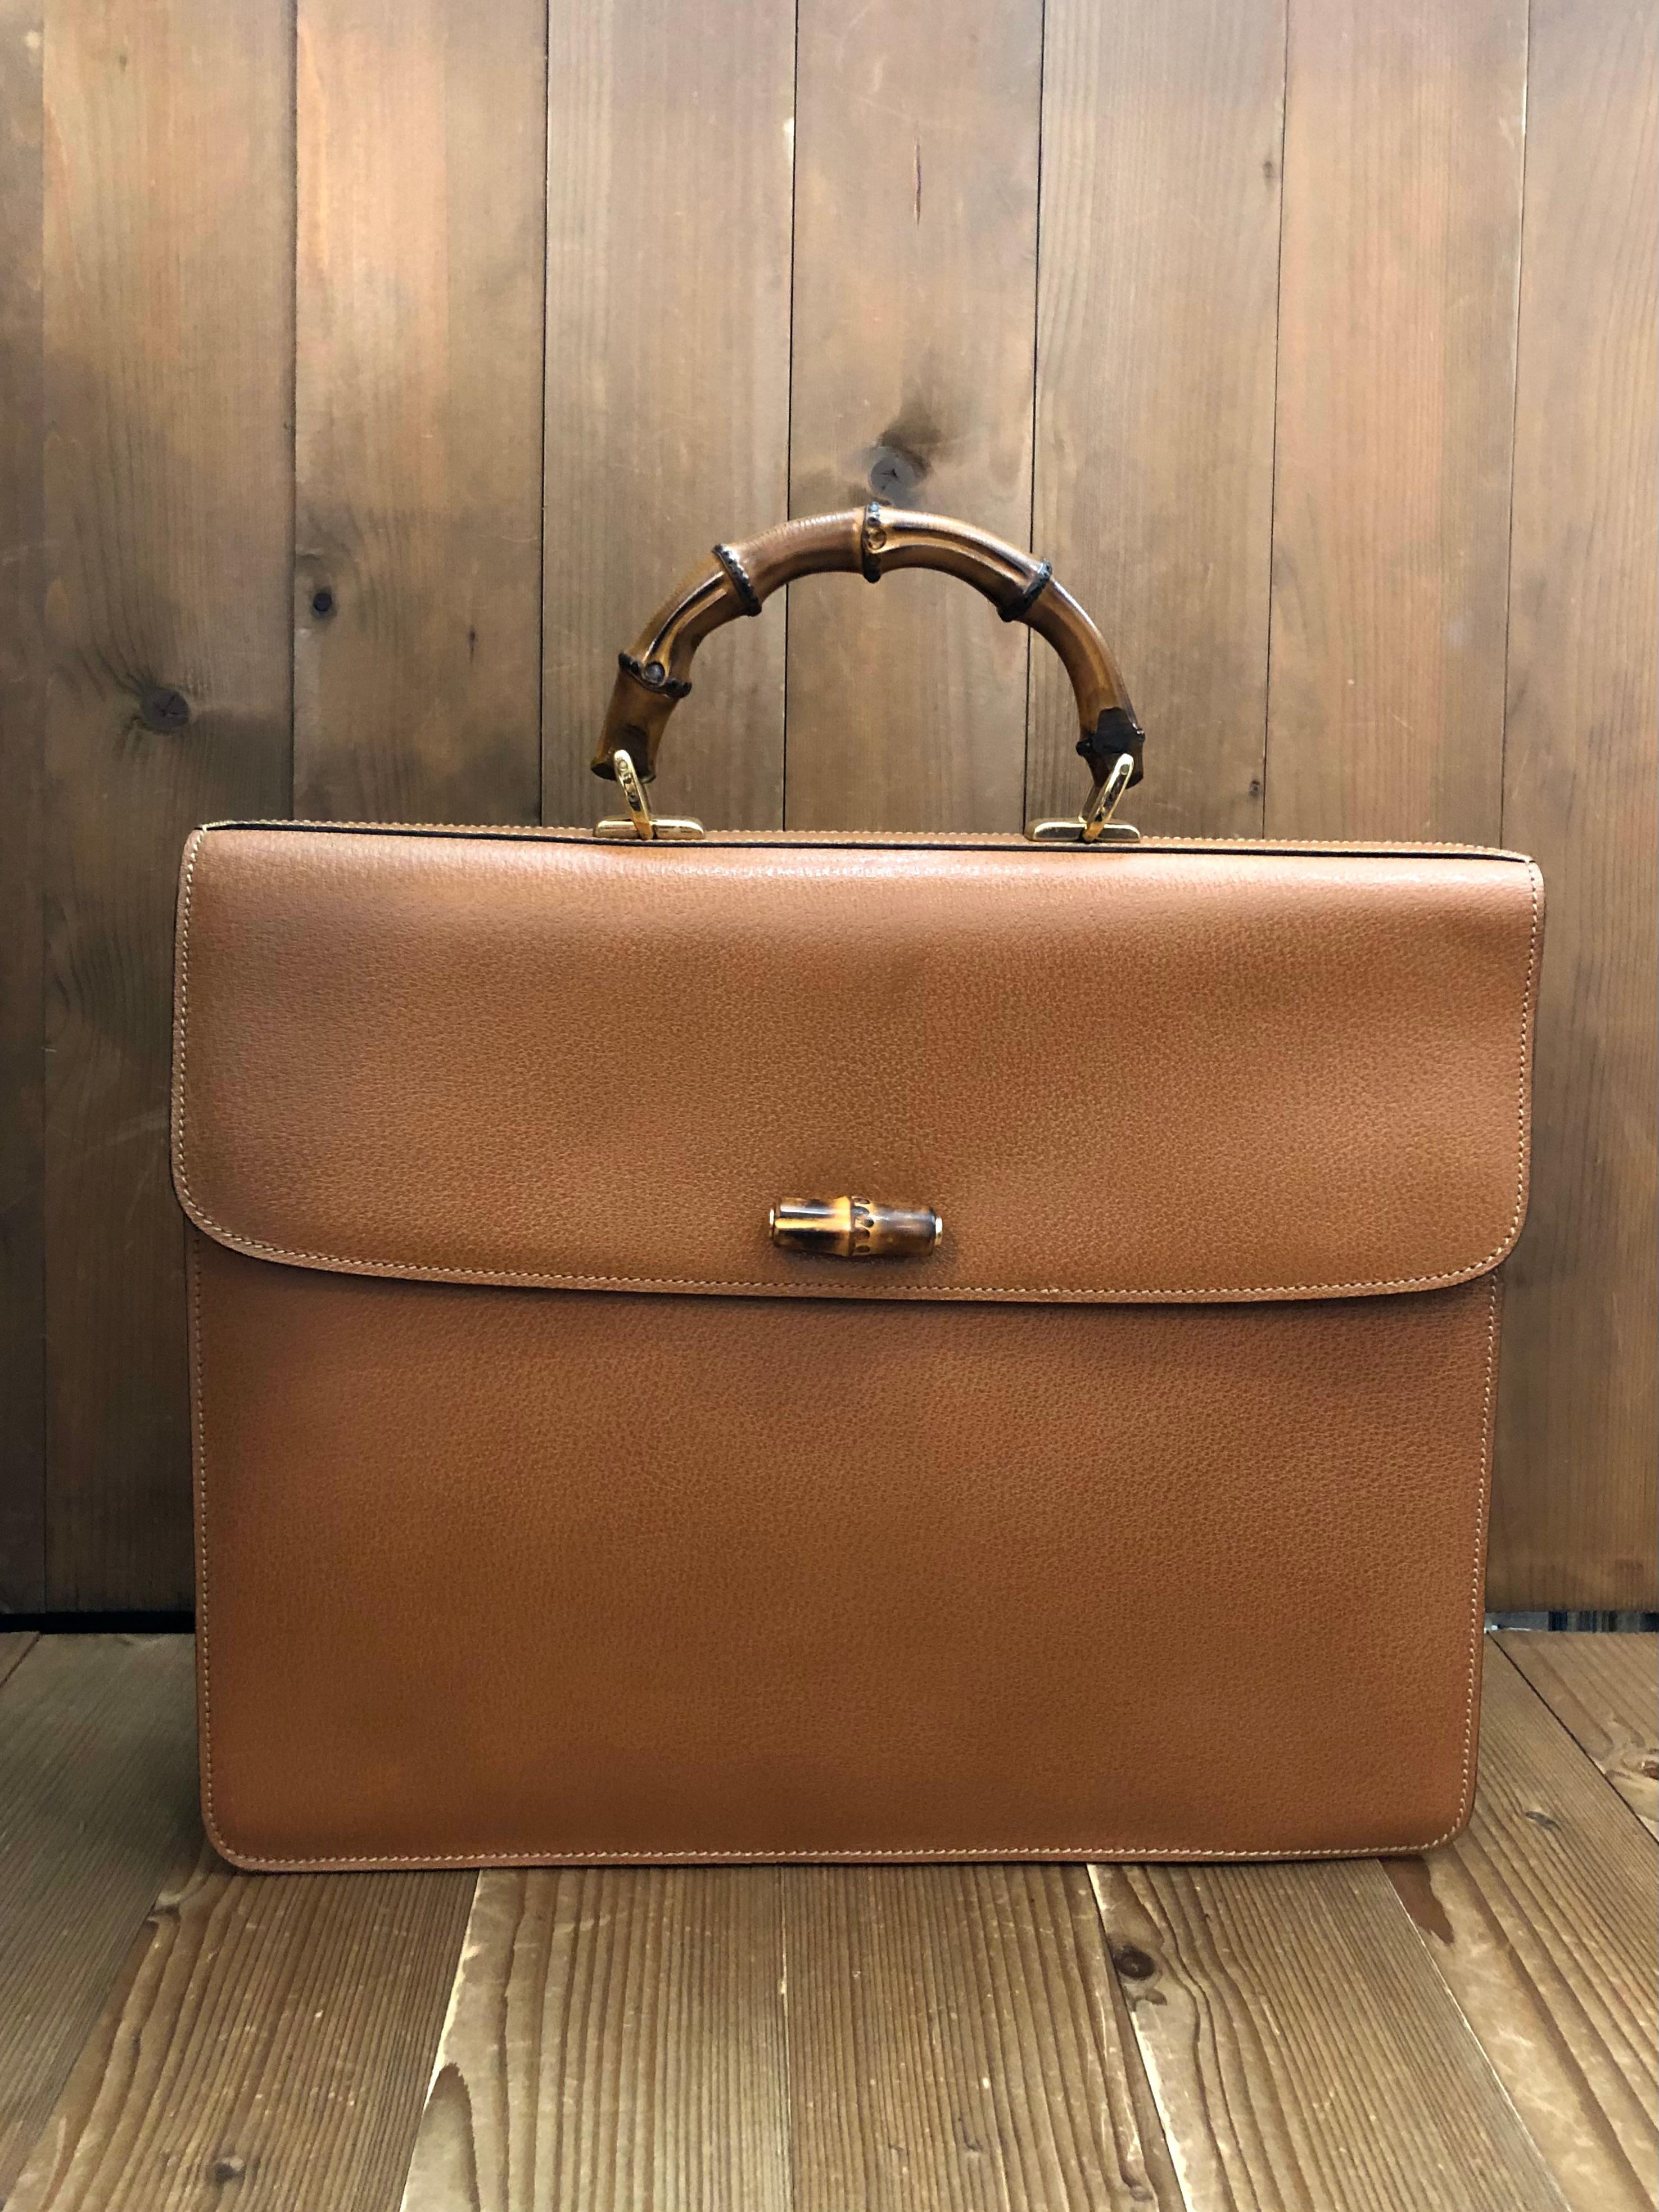 This vintage GUCCI bamboo briefcase/attache is crafted of pigskin leather in caramel brown featuring gold toned hardware and a sturdy bamboo handle. Front pressed-hold bamboo closure opens to a luxurious nubuck interior in neutral color featuring